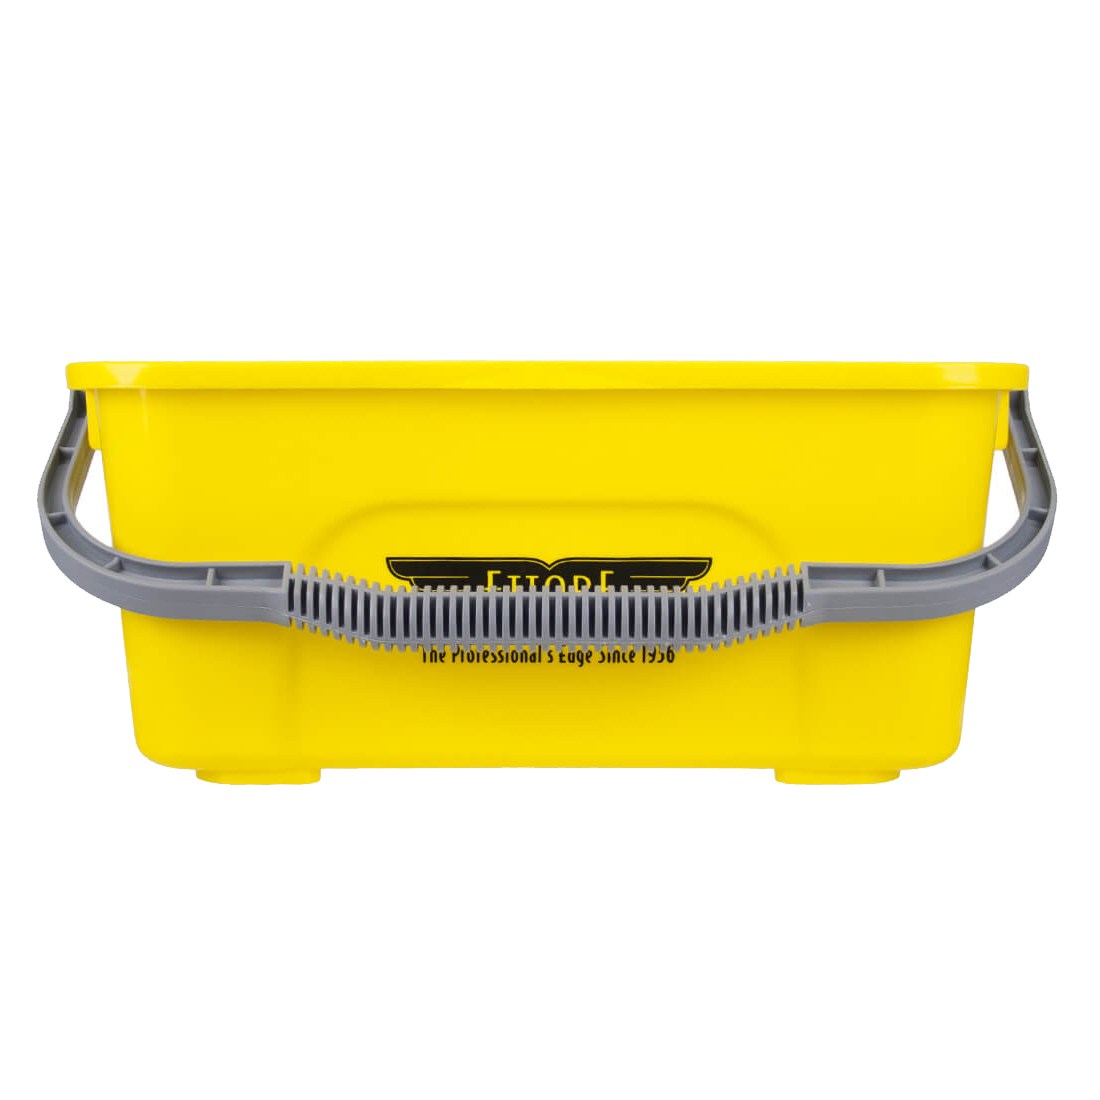 Ettore Compact Super Bucket, Window Cleaning